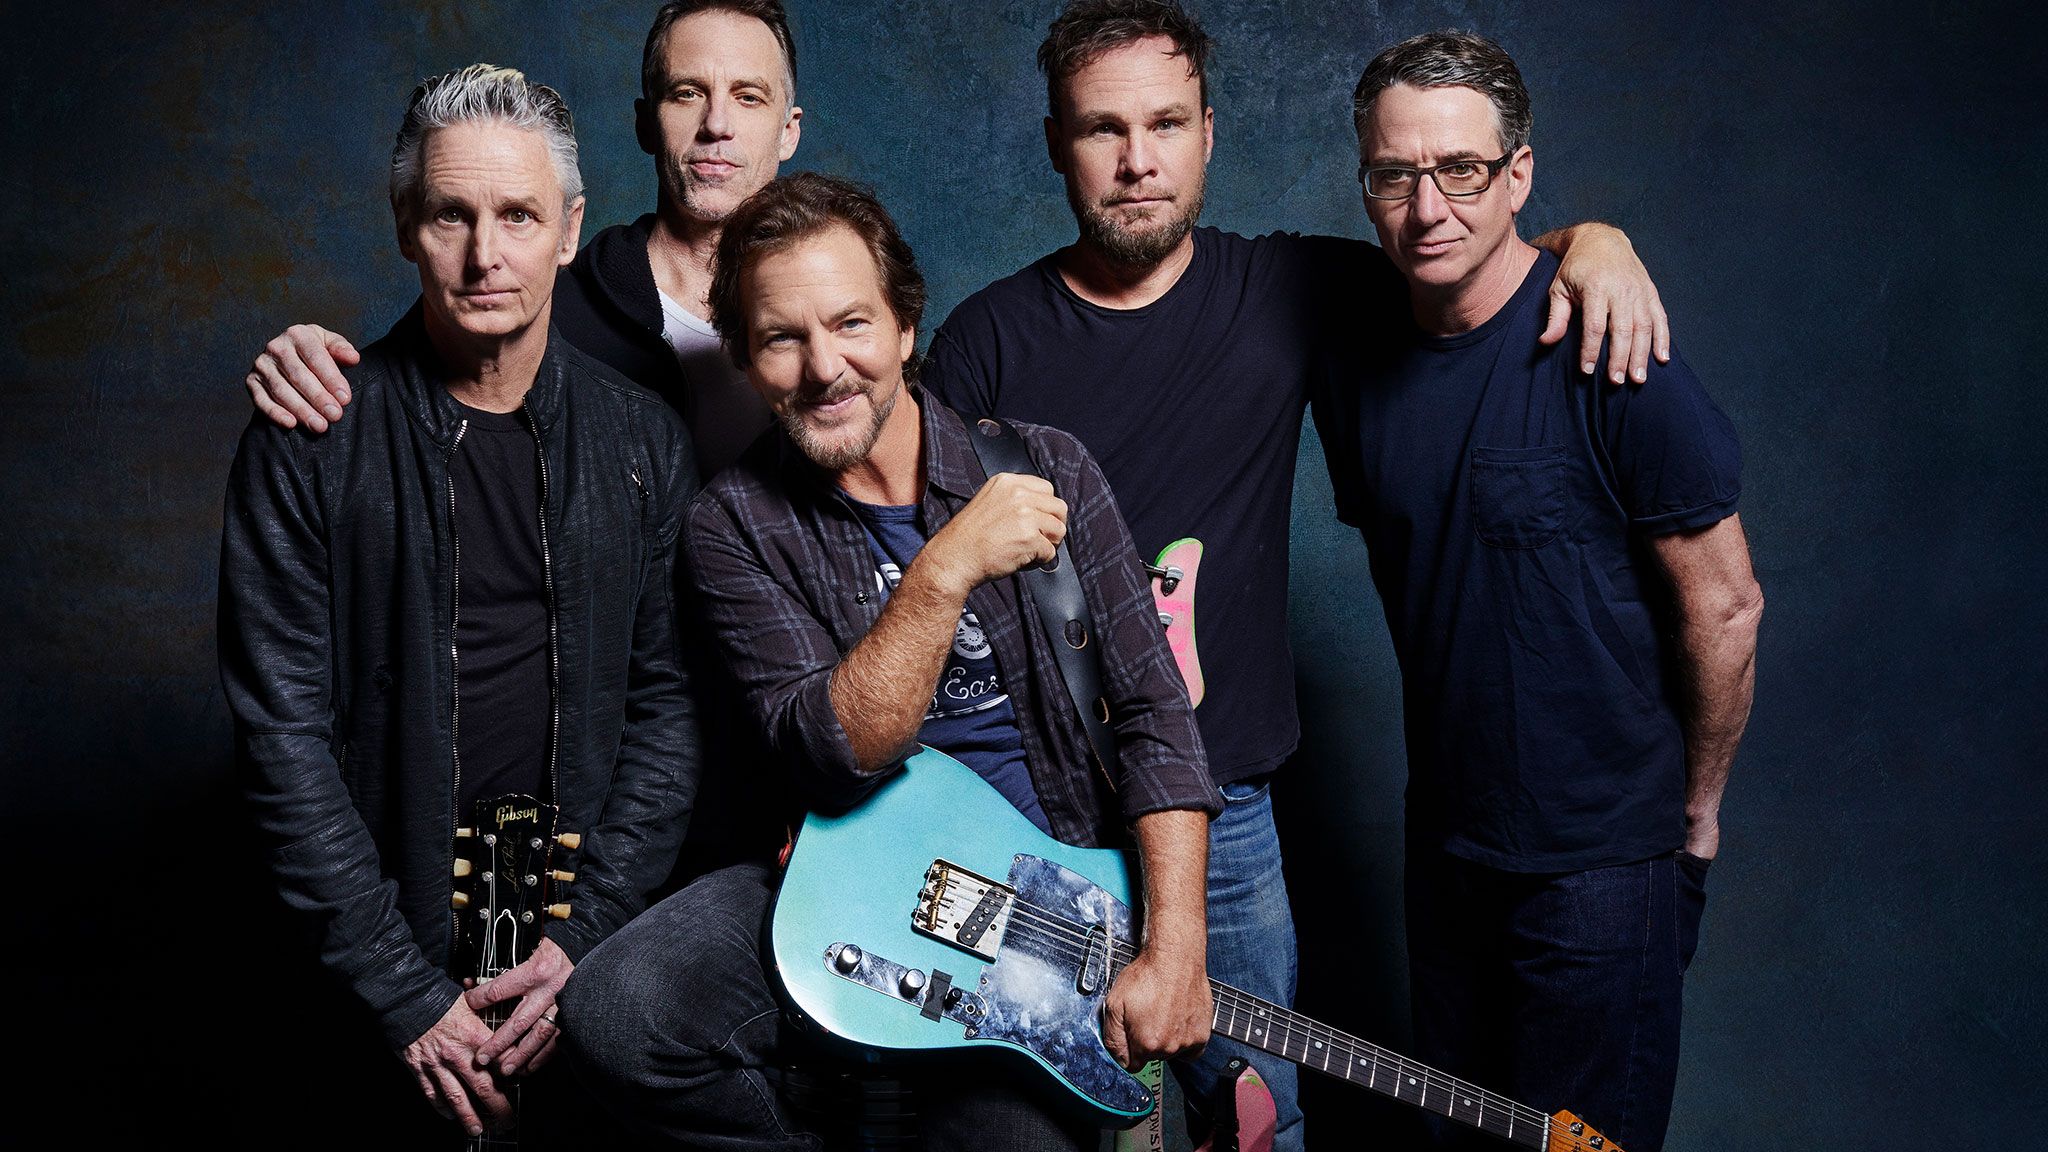 Pearl Jam burst into action with Gigaton, their first album